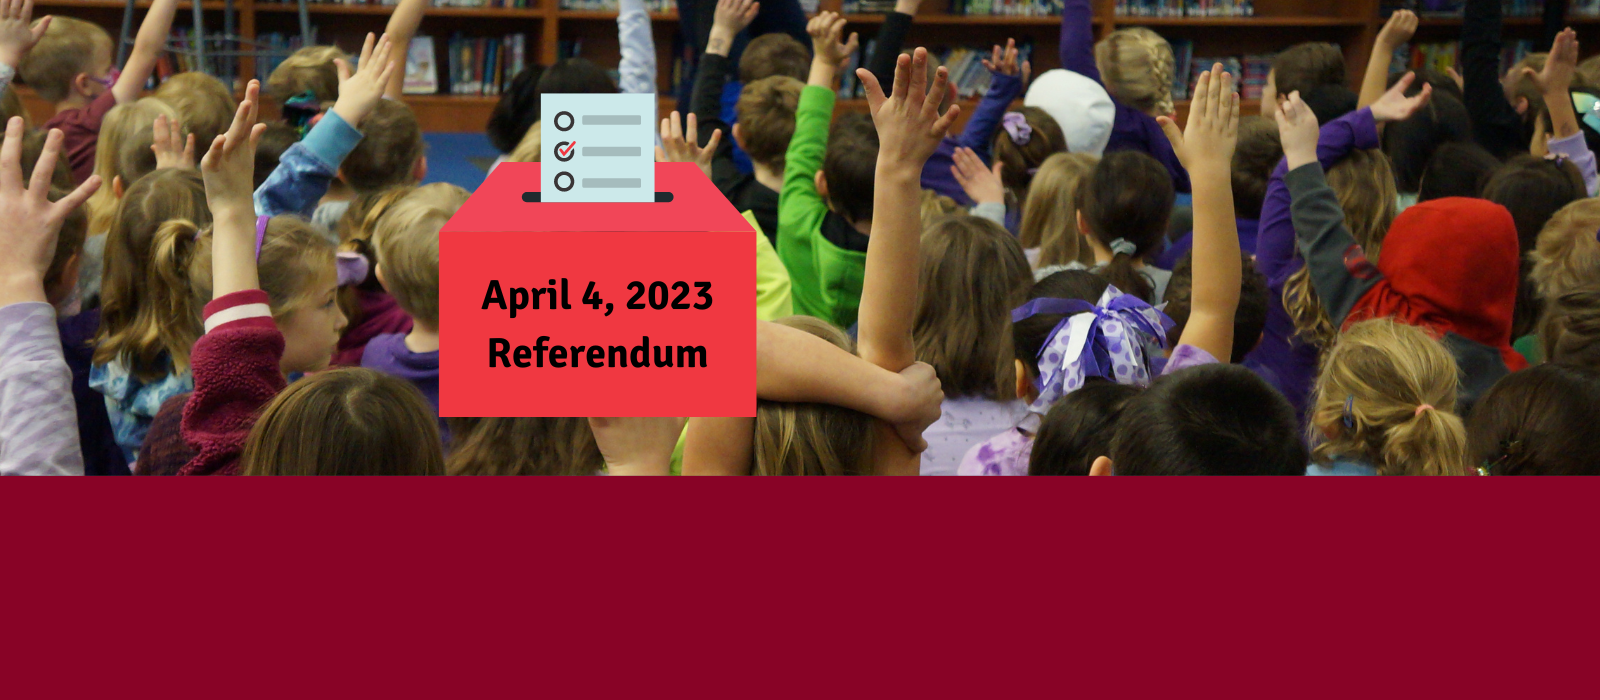 <h2>Referendum Information</h2>
<p>Stay up-to-date with the referendum discussion.<br />
&nbsp;<br />
<a href="https://www.bps101.net/referendum" class="button ">Details Here</a></p>
